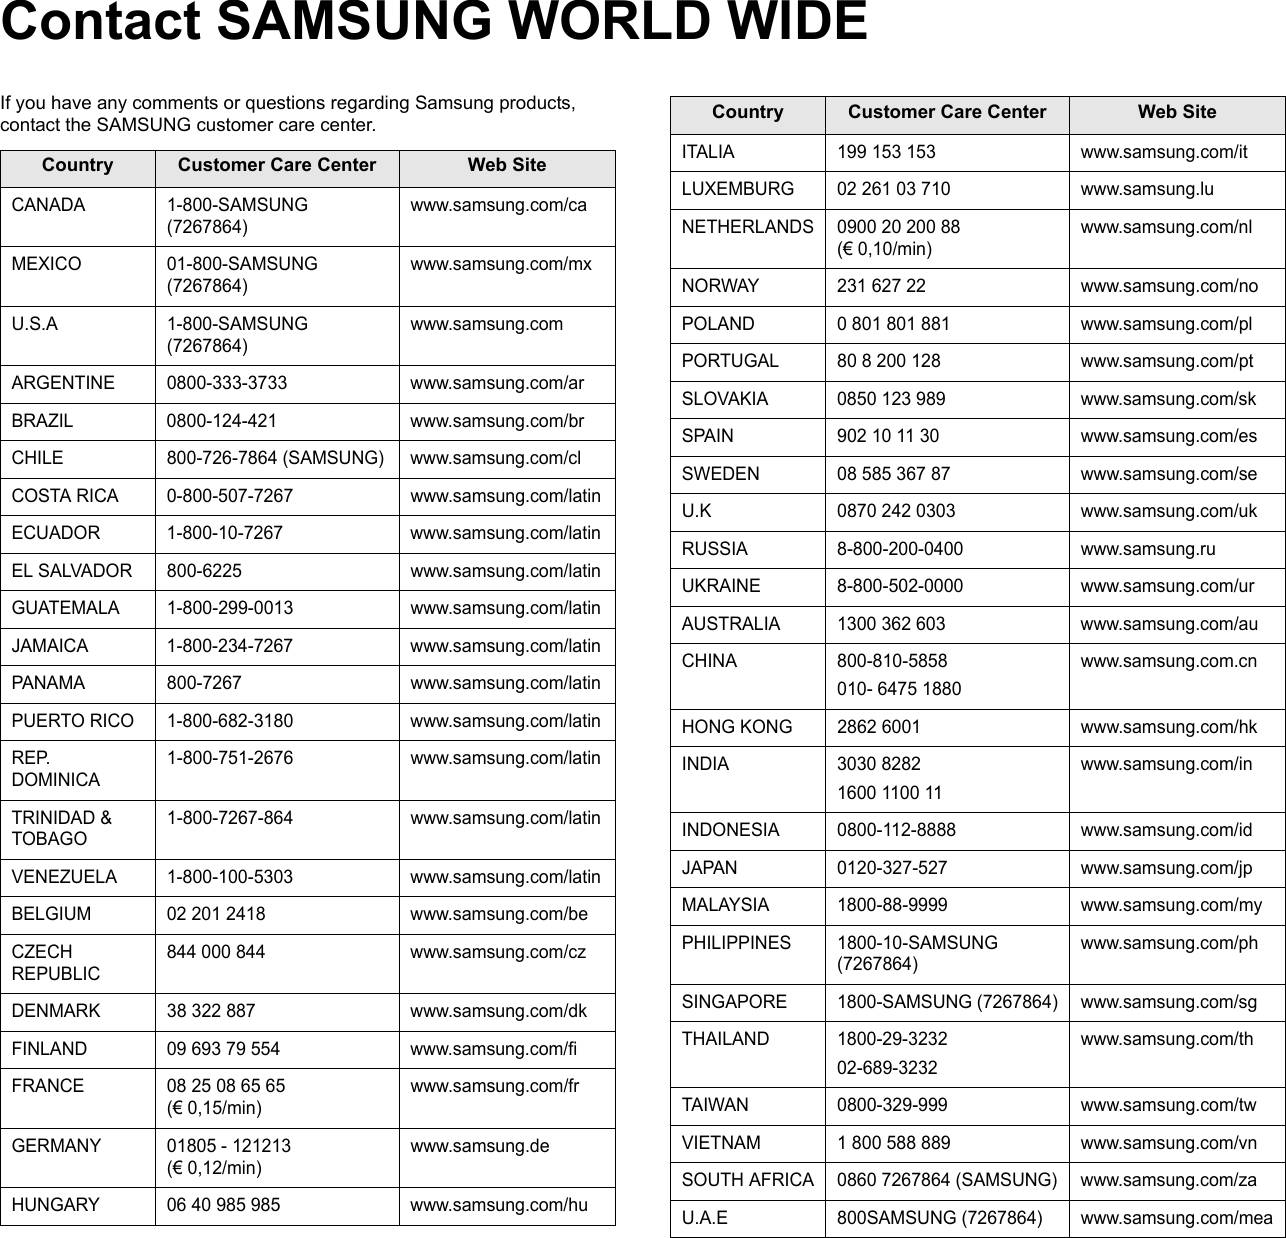 Contact SAMSUNG WORLD WIDEIf you have any comments or questions regarding Samsung products, contact the SAMSUNG customer care center. Country Customer Care Center  Web SiteCANADA 1-800-SAMSUNG (7267864)www.samsung.com/caMEXICO 01-800-SAMSUNG (7267864)www.samsung.com/mxU.S.A 1-800-SAMSUNG (7267864)www.samsung.comARGENTINE 0800-333-3733 www.samsung.com/arBRAZIL 0800-124-421 www.samsung.com/brCHILE 800-726-7864 (SAMSUNG) www.samsung.com/clCOSTA RICA 0-800-507-7267 www.samsung.com/latinECUADOR 1-800-10-7267 www.samsung.com/latinEL SALVADOR 800-6225 www.samsung.com/latinGUATEMALA 1-800-299-0013 www.samsung.com/latinJAMAICA 1-800-234-7267 www.samsung.com/latinPANAMA 800-7267 www.samsung.com/latinPUERTO RICO 1-800-682-3180 www.samsung.com/latinREP. DOMINICA1-800-751-2676 www.samsung.com/latinTRINIDAD &amp; TOBAGO1-800-7267-864 www.samsung.com/latinVENEZUELA 1-800-100-5303 www.samsung.com/latinBELGIUM 02 201 2418 www.samsung.com/beCZECH REPUBLIC844 000 844 www.samsung.com/czDENMARK 38 322 887 www.samsung.com/dkFINLAND 09 693 79 554 www.samsung.com/fiFRANCE 08 25 08 65 65 (€ 0,15/min)www.samsung.com/frGERMANY 01805 - 121213 (€ 0,12/min)www.samsung.deHUNGARY 06 40 985 985 www.samsung.com/huITALIA 199 153 153 www.samsung.com/itLUXEMBURG 02 261 03 710 www.samsung.luNETHERLANDS 0900 20 200 88(€ 0,10/min)www.samsung.com/nlNORWAY 231 627 22 www.samsung.com/noPOLAND 0 801 801 881 www.samsung.com/plPORTUGAL 80 8 200 128 www.samsung.com/ptSLOVAKIA 0850 123 989 www.samsung.com/skSPAIN 902 10 11 30 www.samsung.com/esSWEDEN 08 585 367 87 www.samsung.com/seU.K 0870 242 0303 www.samsung.com/ukRUSSIA 8-800-200-0400 www.samsung.ruUKRAINE 8-800-502-0000 www.samsung.com/urAUSTRALIA 1300 362 603 www.samsung.com/auCHINA 800-810-5858010- 6475 1880www.samsung.com.cnHONG KONG 2862 6001 www.samsung.com/hkINDIA 3030 82821600 1100 11www.samsung.com/inINDONESIA 0800-112-8888 www.samsung.com/idJAPAN 0120-327-527 www.samsung.com/jpMALAYSIA 1800-88-9999 www.samsung.com/myPHILIPPINES 1800-10-SAMSUNG (7267864)www.samsung.com/phSINGAPORE 1800-SAMSUNG (7267864) www.samsung.com/sgTHAILAND 1800-29-323202-689-3232www.samsung.com/thTAIWAN 0800-329-999 www.samsung.com/twVIETNAM 1 800 588 889 www.samsung.com/vnSOUTH AFRICA 0860 7267864 (SAMSUNG) www.samsung.com/zaU.A.E 800SAMSUNG (7267864) www.samsung.com/meaCountry Customer Care Center  Web Site